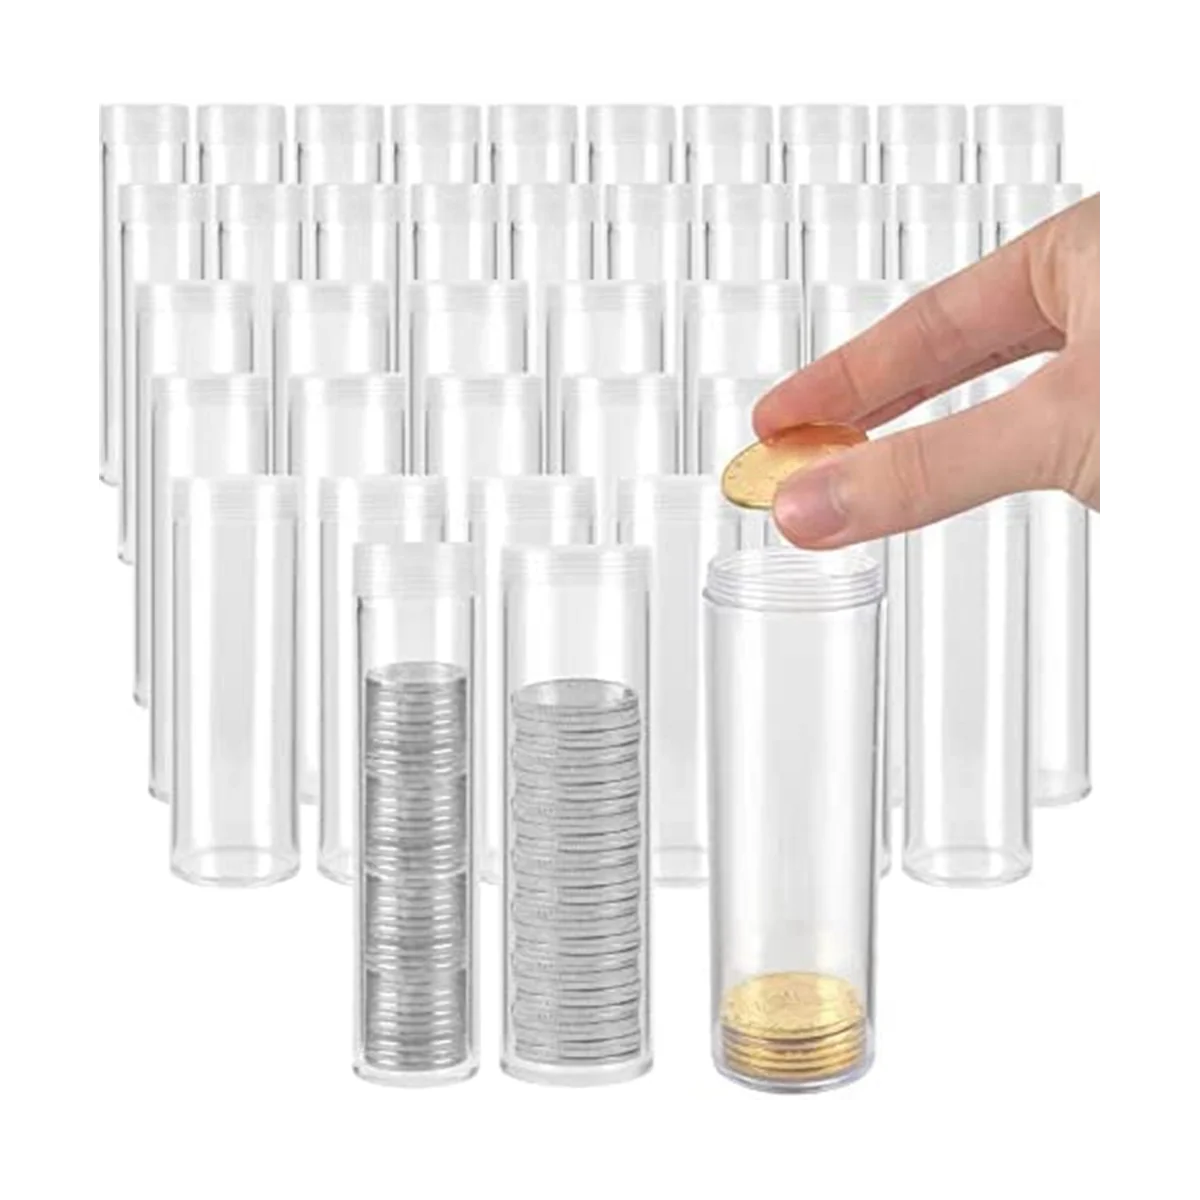 

100Pieces Coin Tubes Assorted Sizes 10 Half-Dollar Coin Storage Tubes 60 Coin Storage Tubes Pennies 30 Quarter Coin Tube